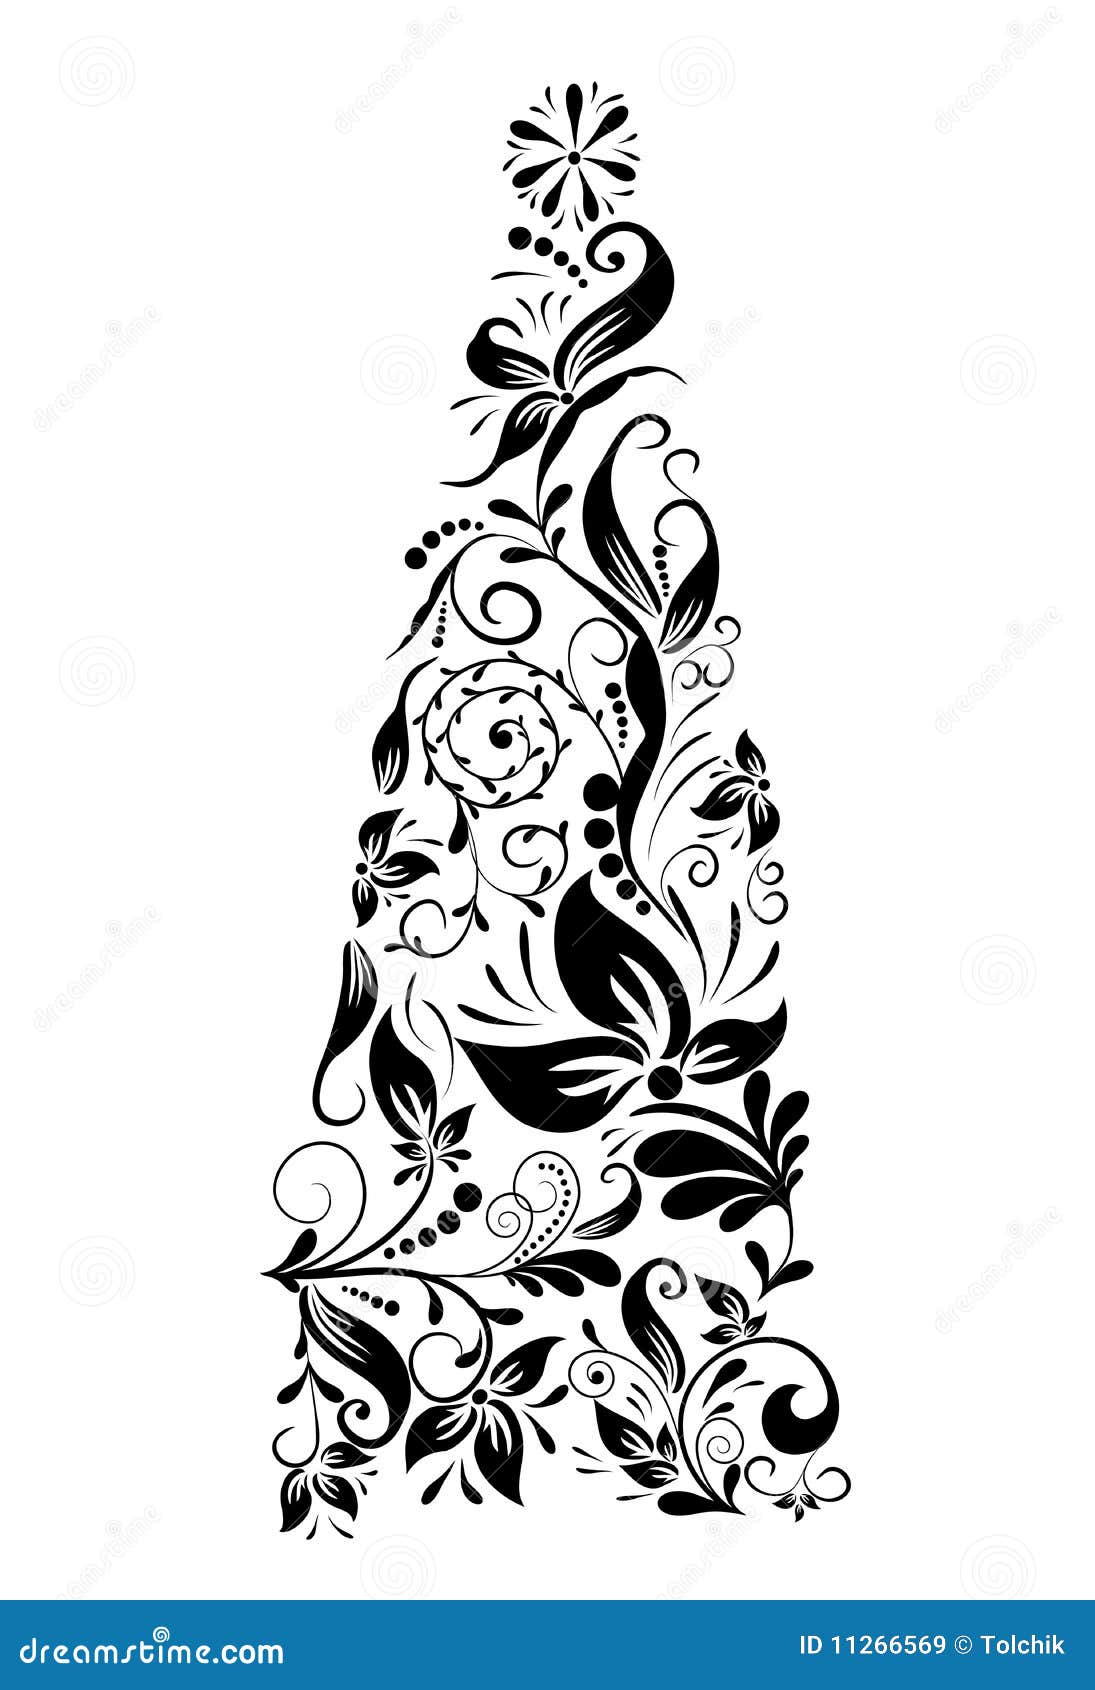 Decorative Floral Christmas Tree, Vector Stock Vector 